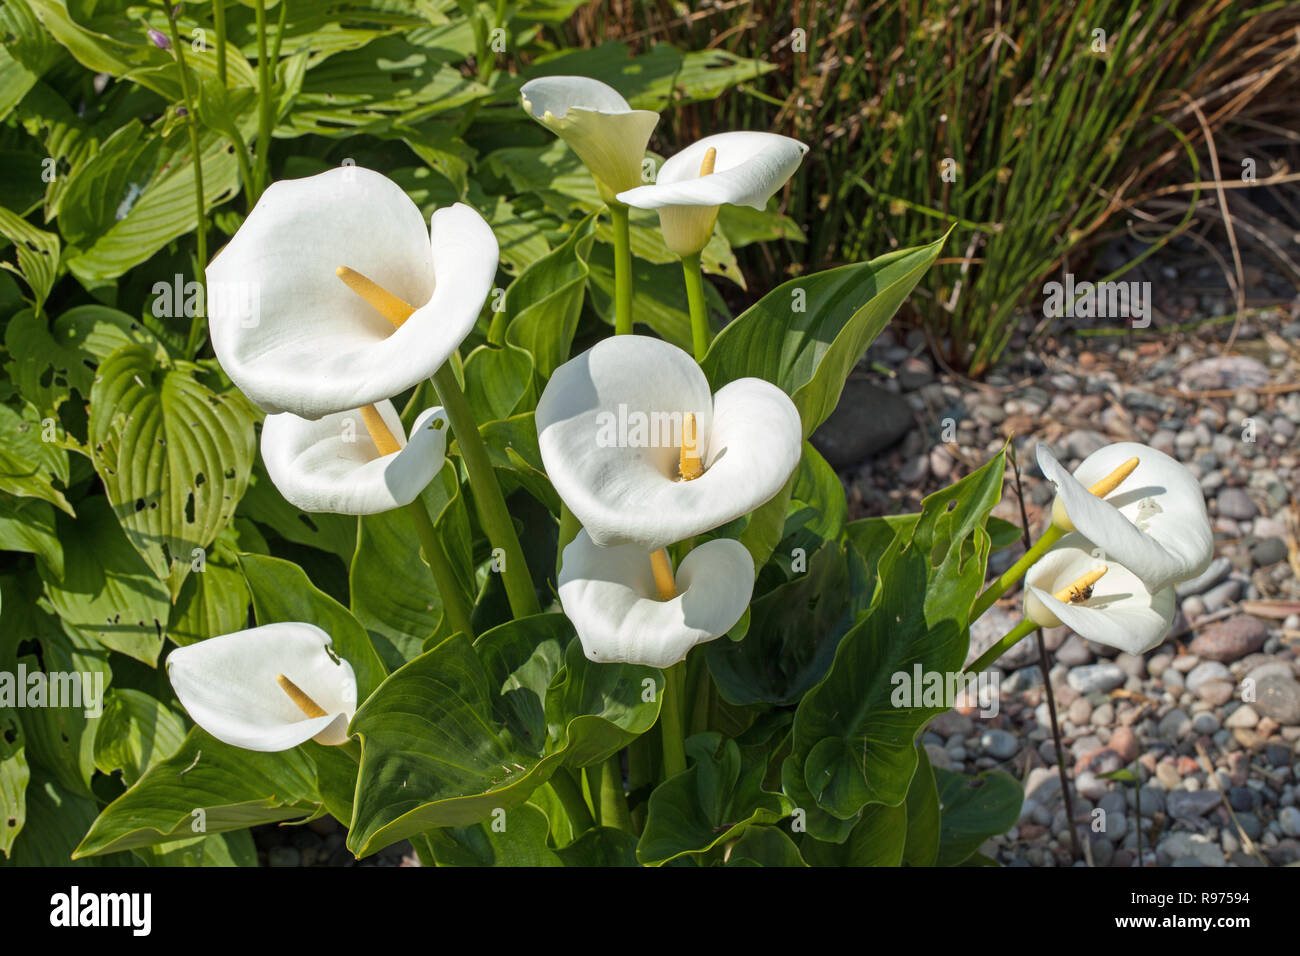 Arum Lily (Zantedeschia aethiopica). Green flowering plant. Cultivated form. Garden of Bishop’s House. Isle of Iona, Inner Hebrides. West coast of Scotland. Stock Photo